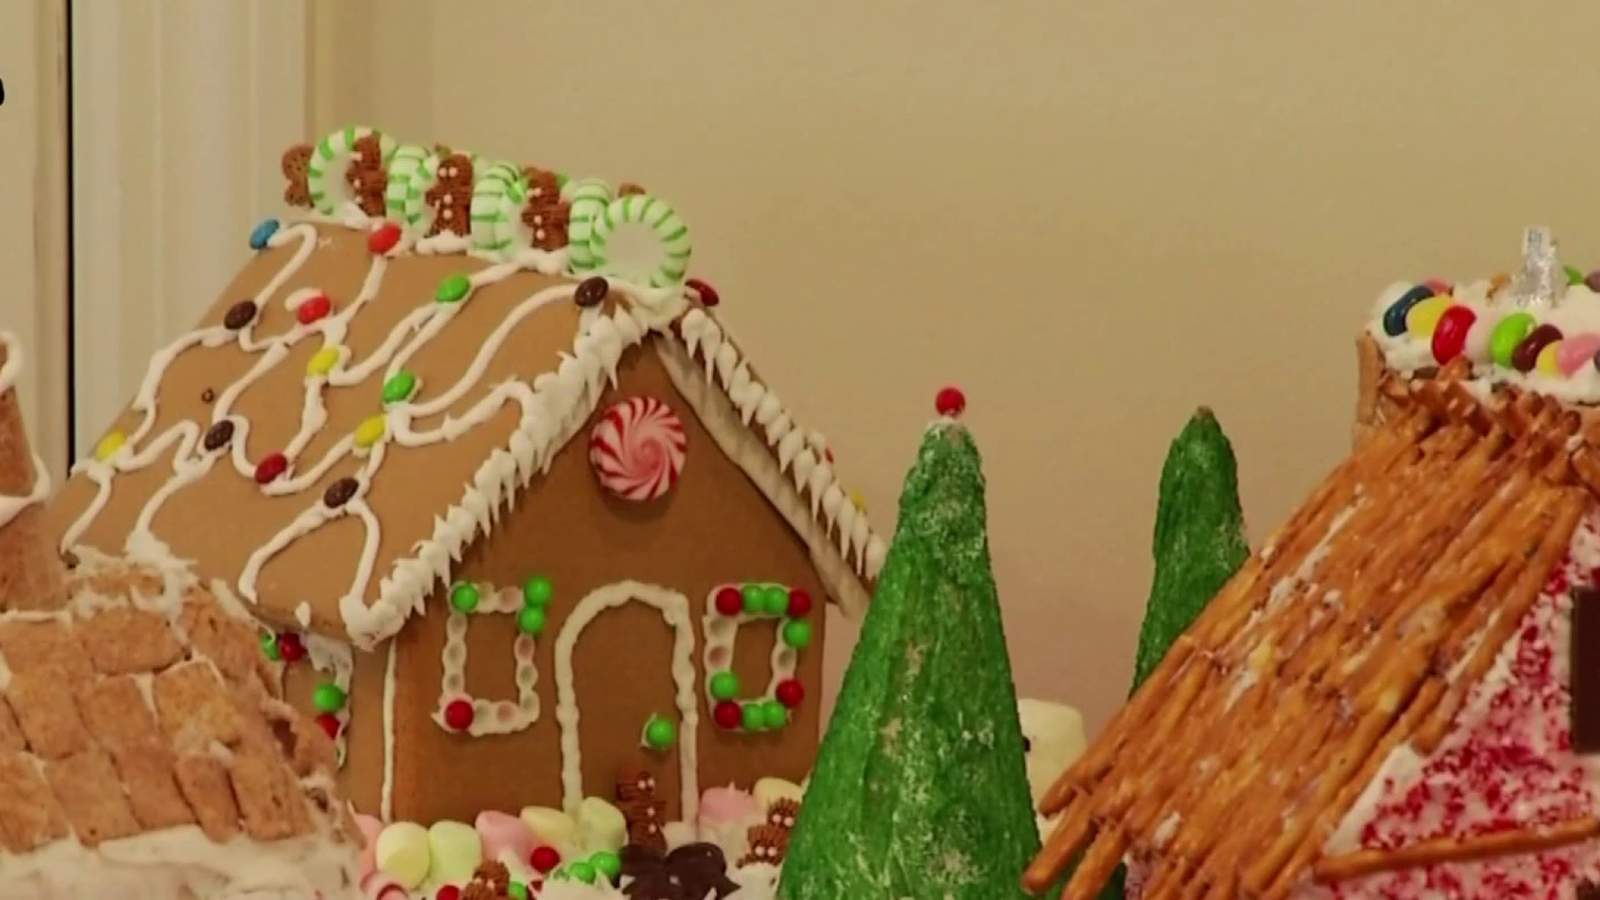 Salem gets into holiday spirit with gingerbread festival